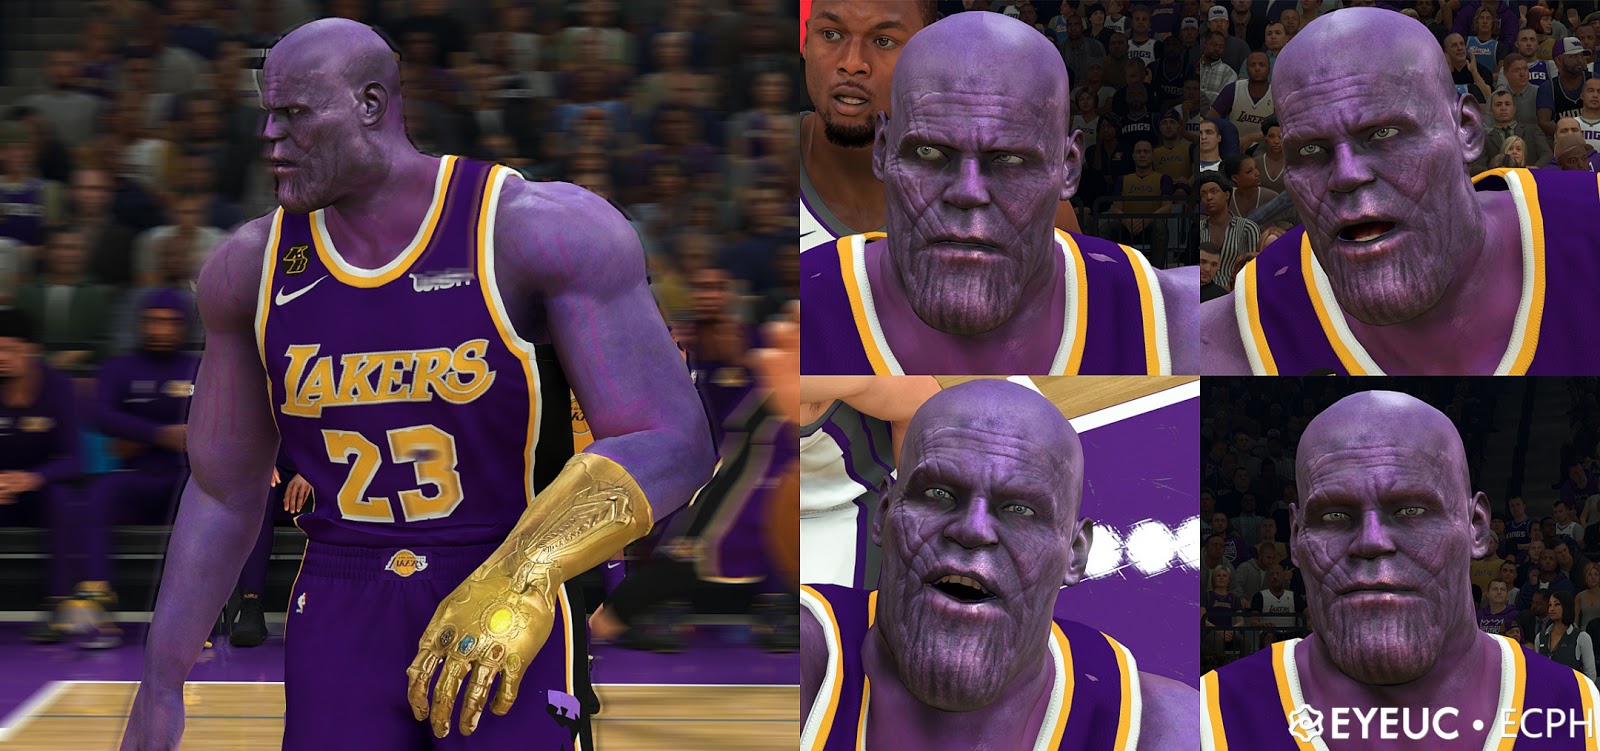 Thanos Cyberface and Body Model By ECPH FOR 2K20.